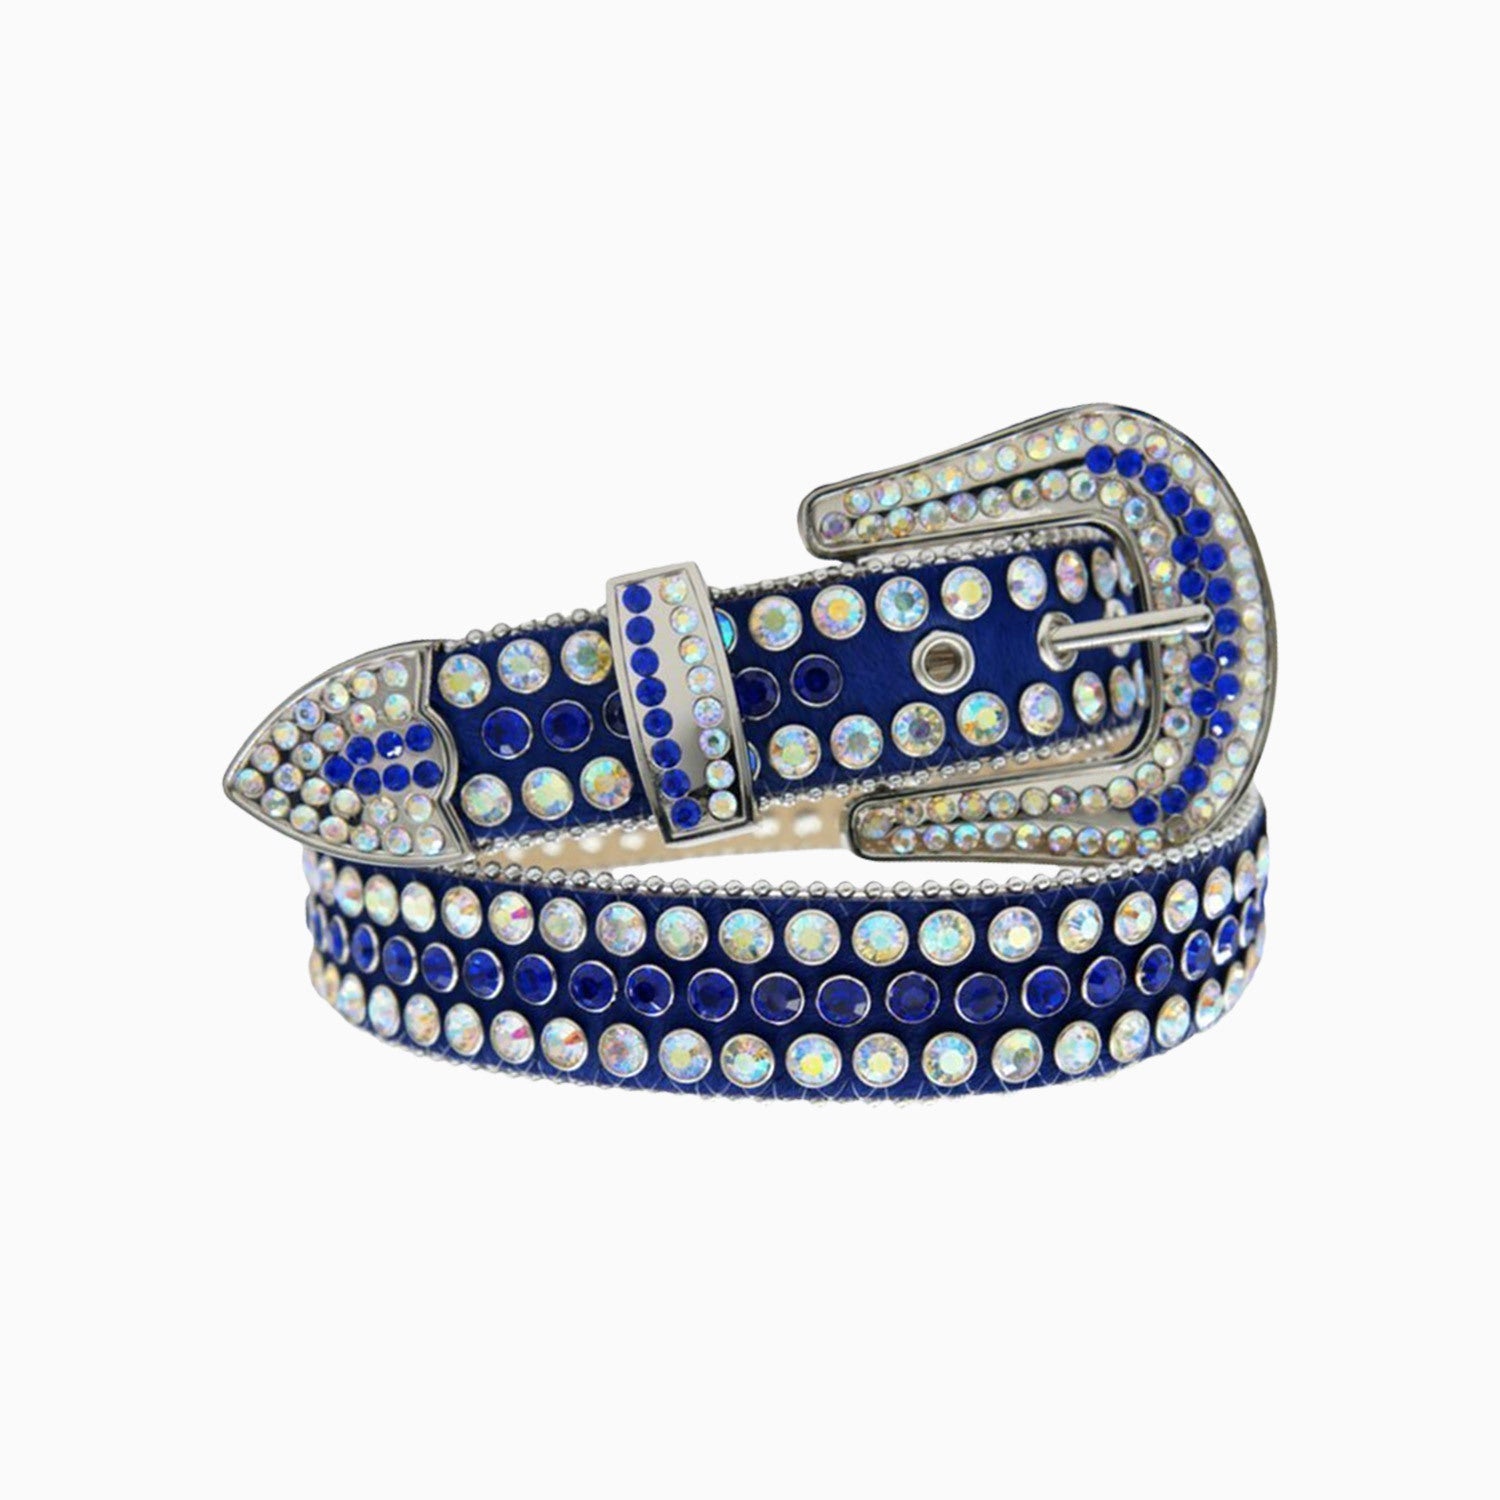 dna-premium-dna-belt-blue-leather-with-blue-and-black-stones-dna-185